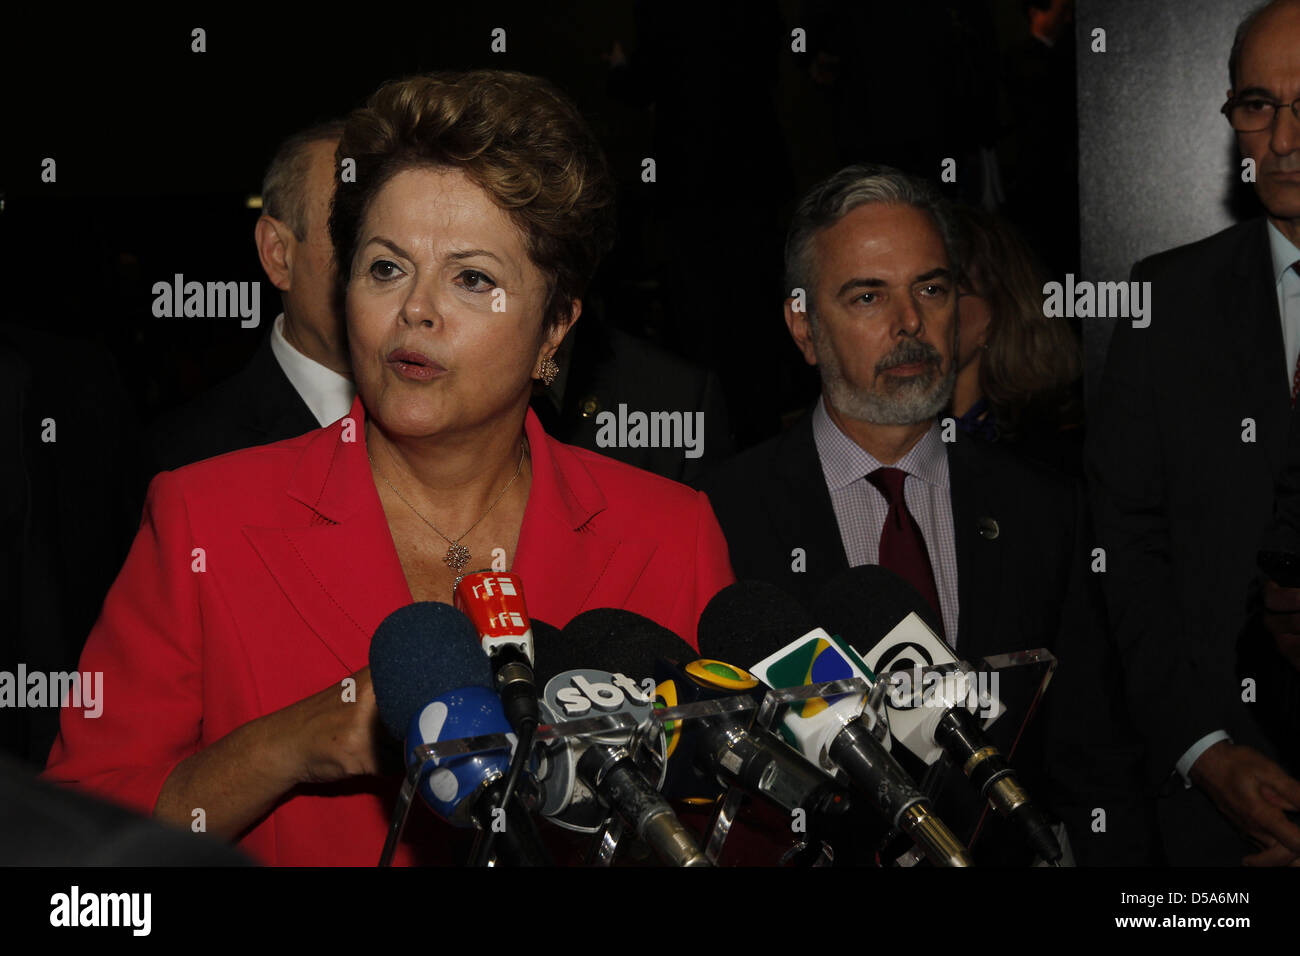 Durban, South Africa. 27th March, 2013. Brazilian president Dilma Rousseff gives an impromptu press conference after the completion of the Fifth Brics Summit in Durban. Picture Giordano Stolley Stock Photo